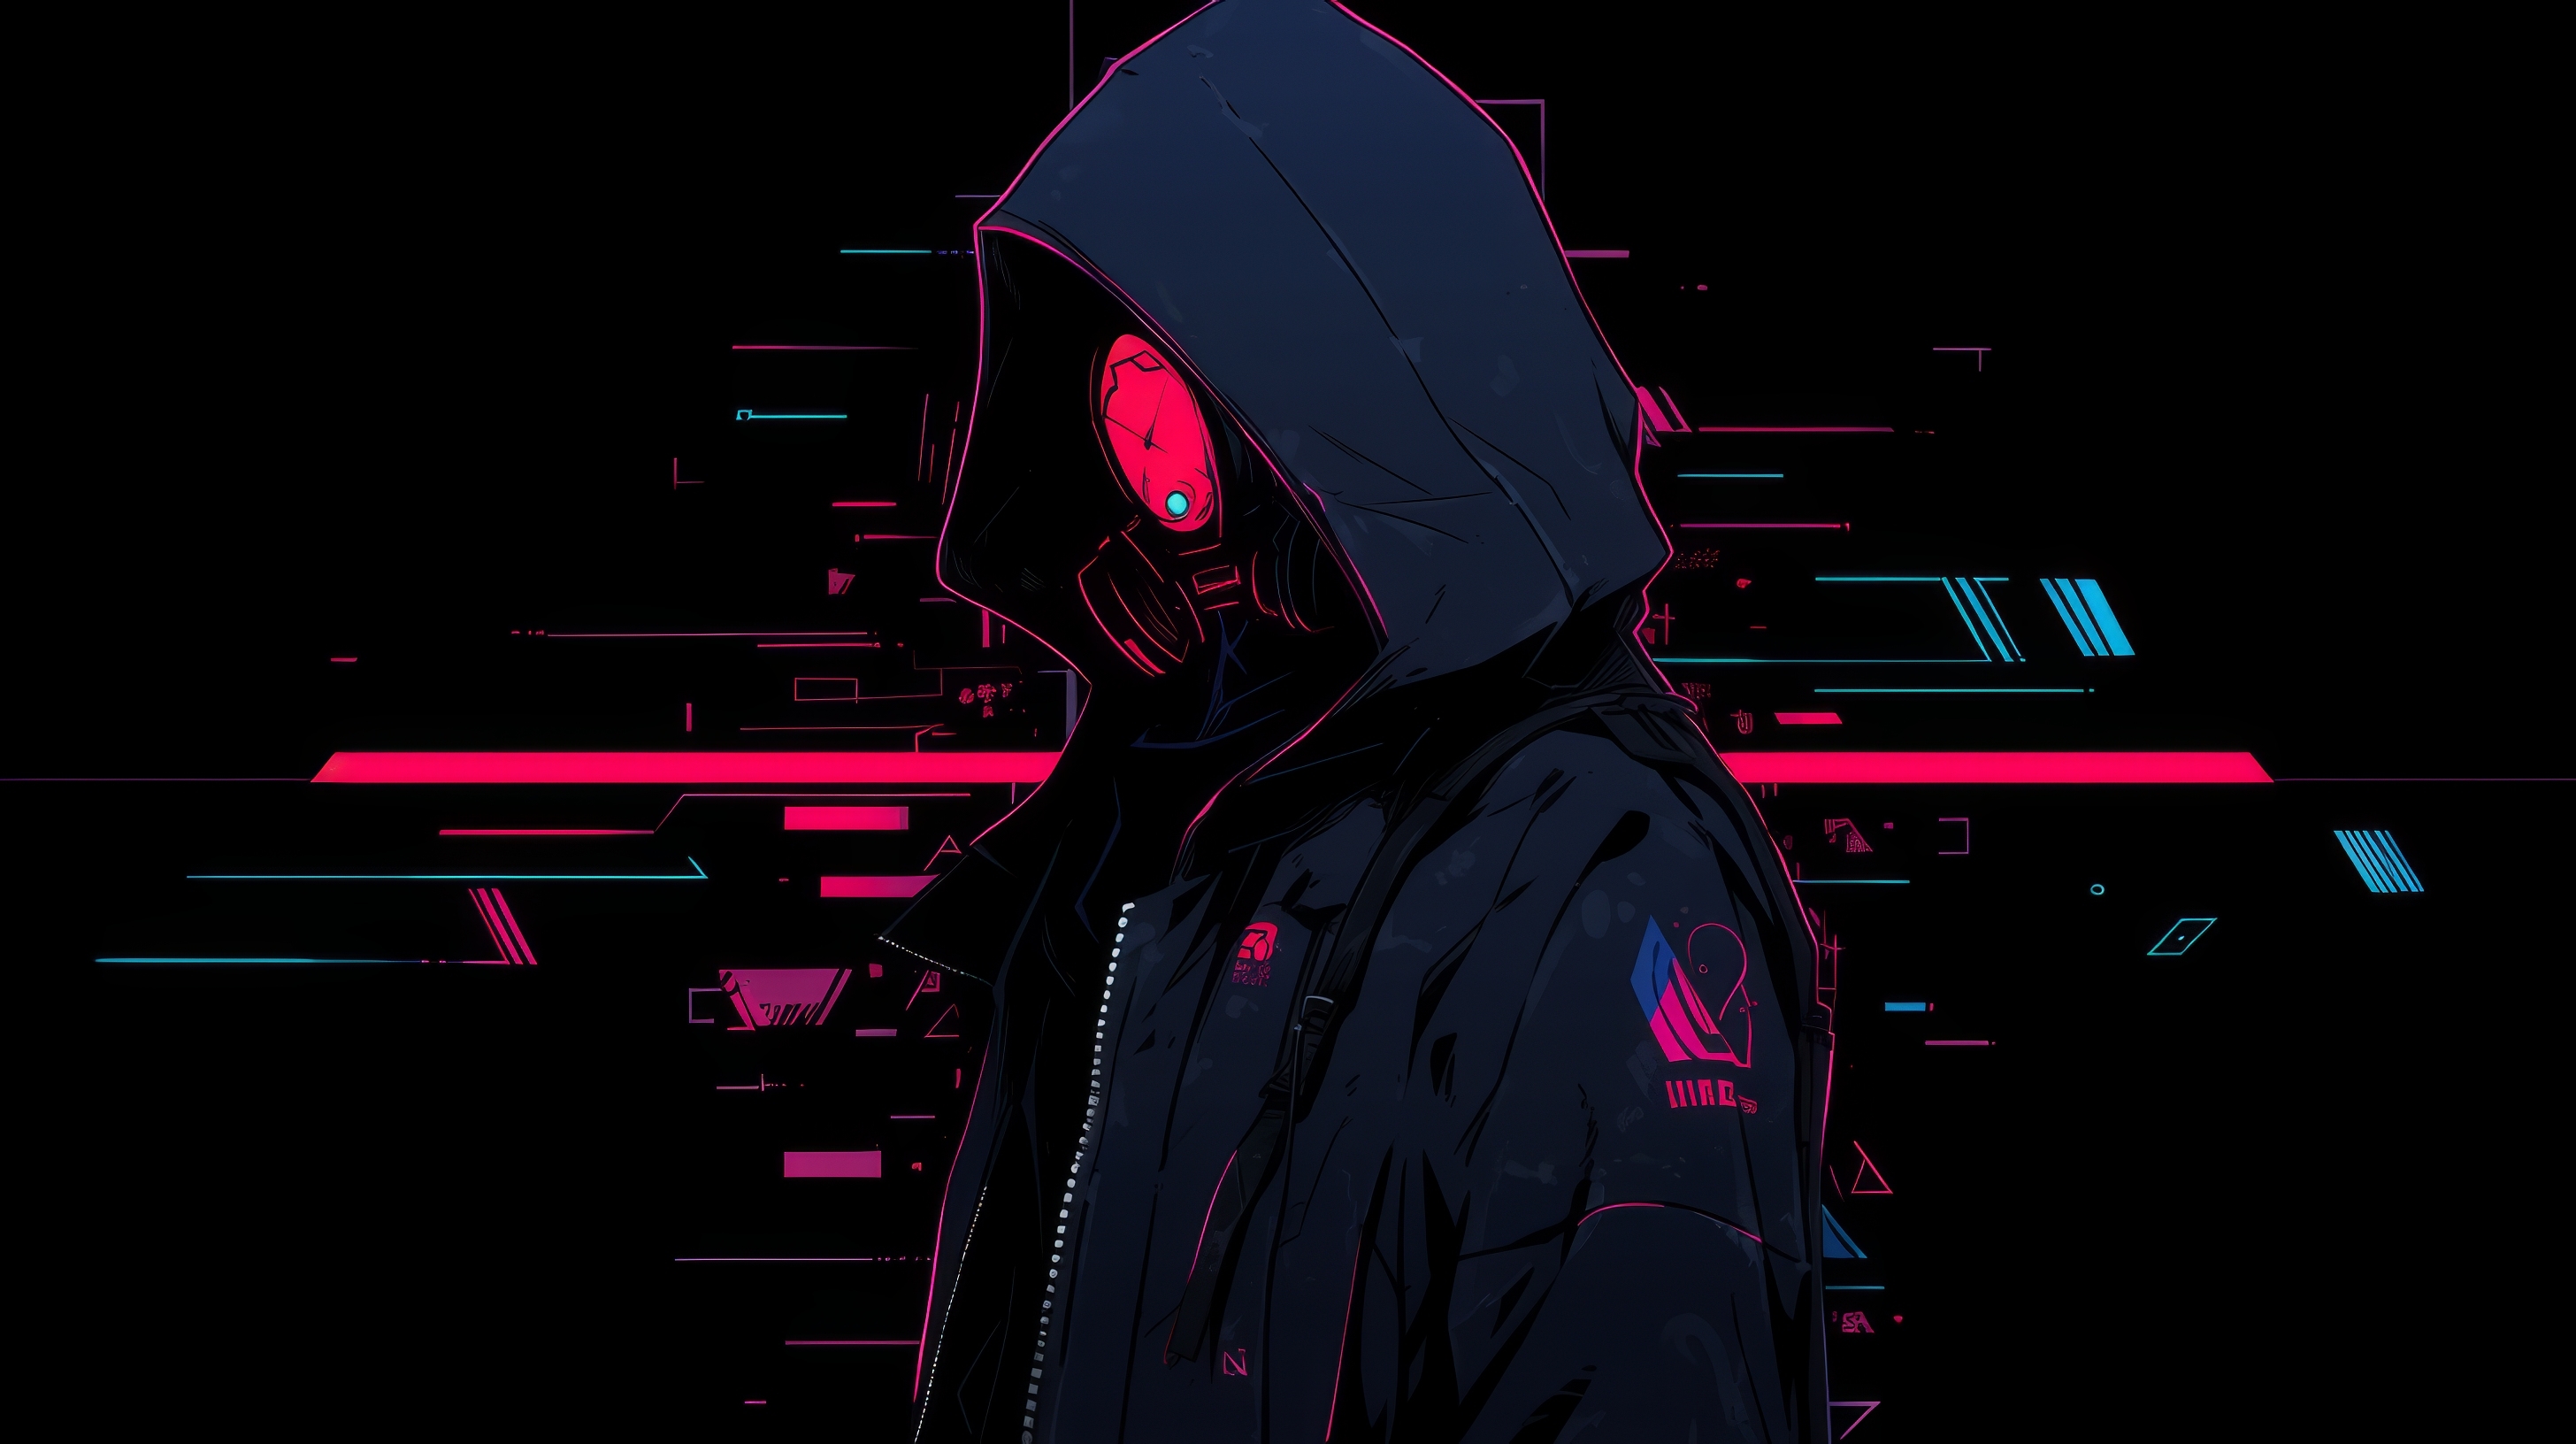 Cyberpunk Android 4k Wallpapers - Wallpaper Cave